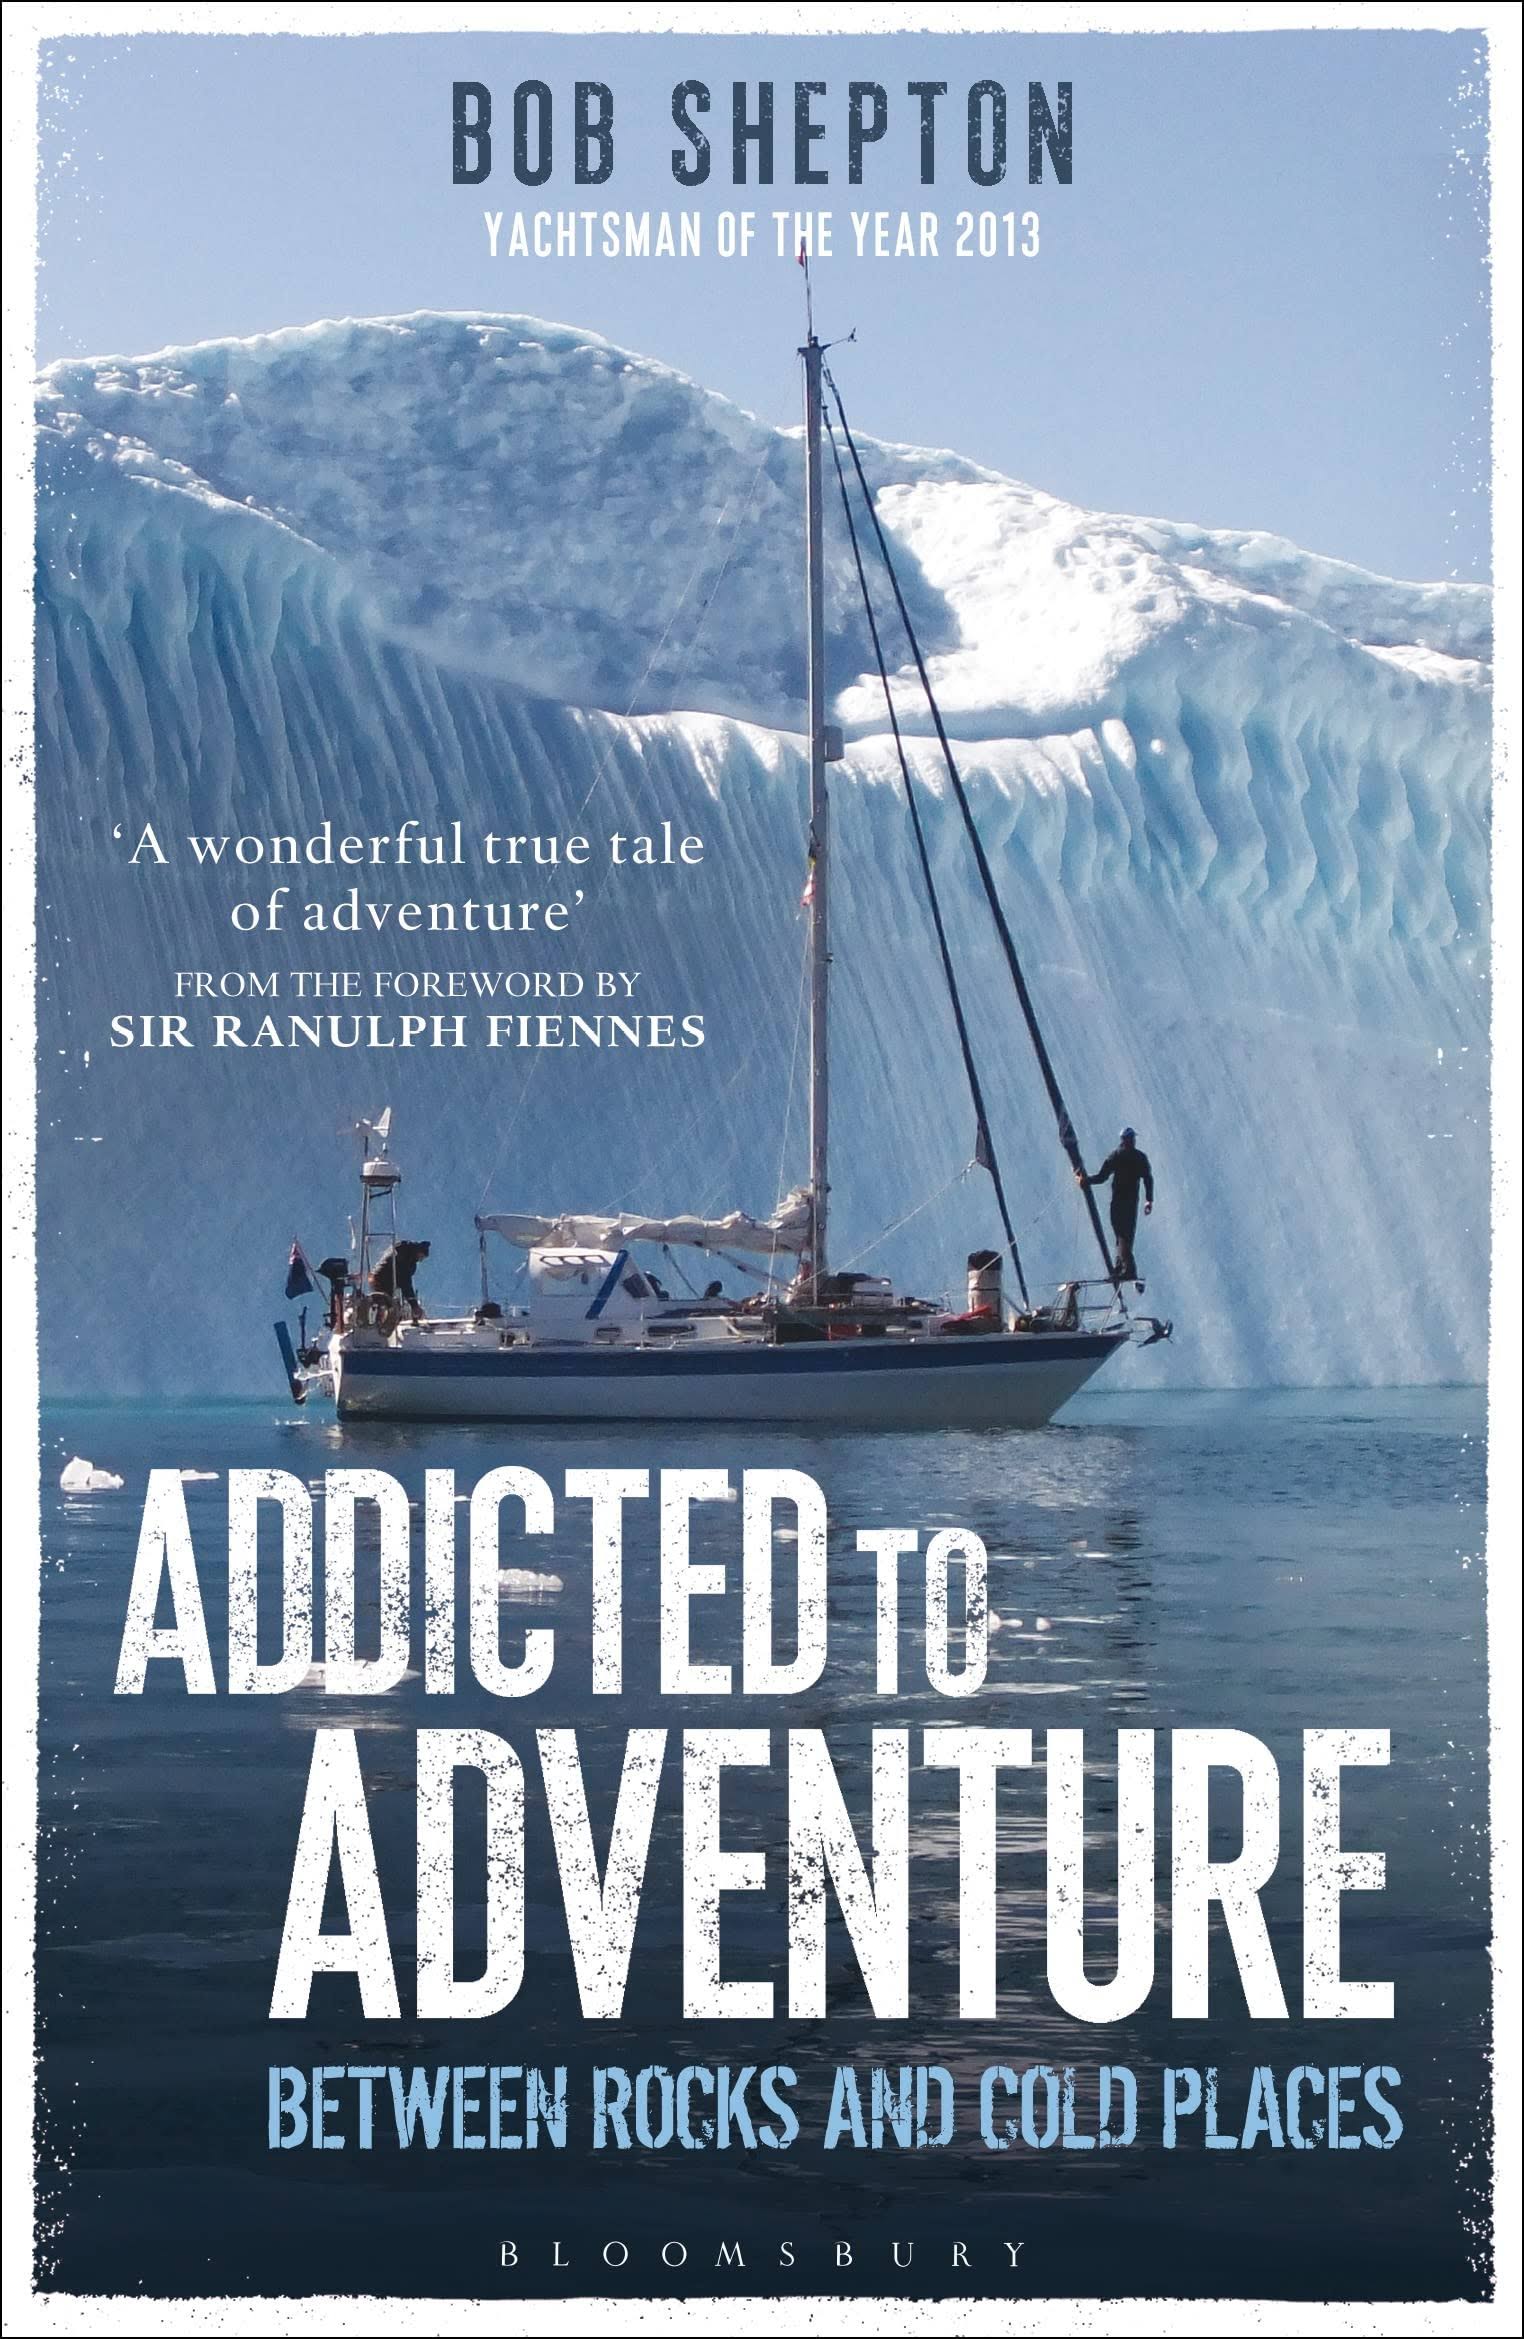 Addicted to Adventure by Bob Shepton